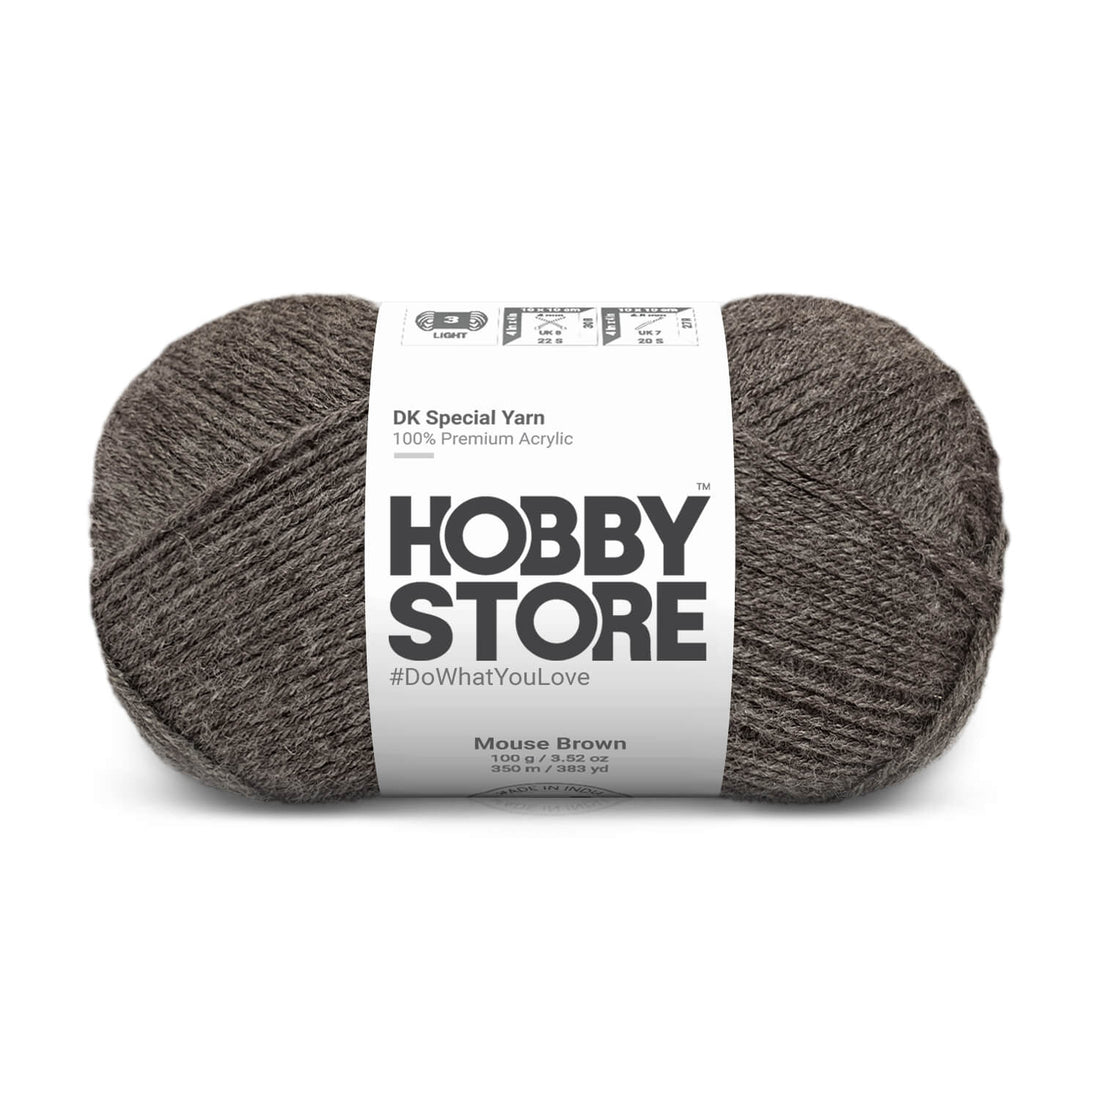 Hobby Store DK Special Yarn - Mouse Brown 5041